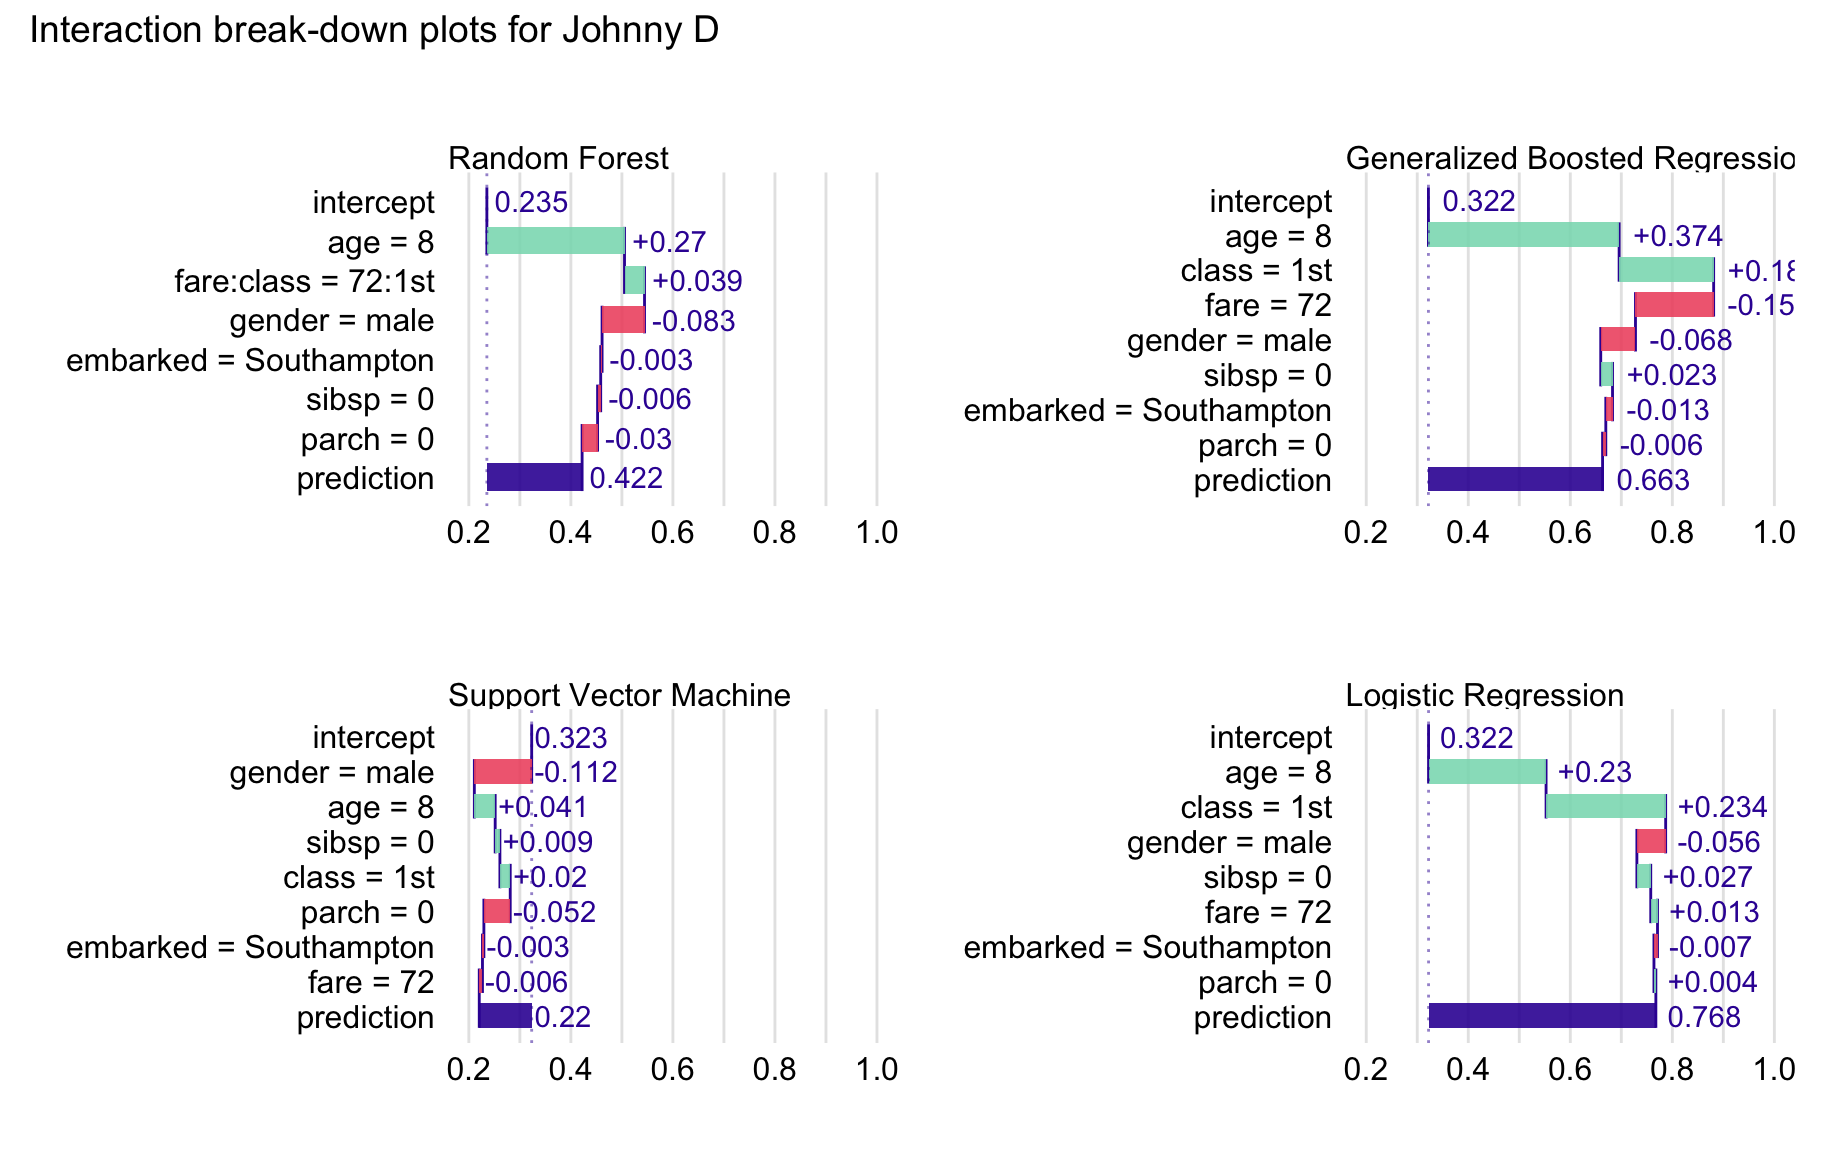 Interaction break-down plots for four different models for the Titanic data and Johnny D.